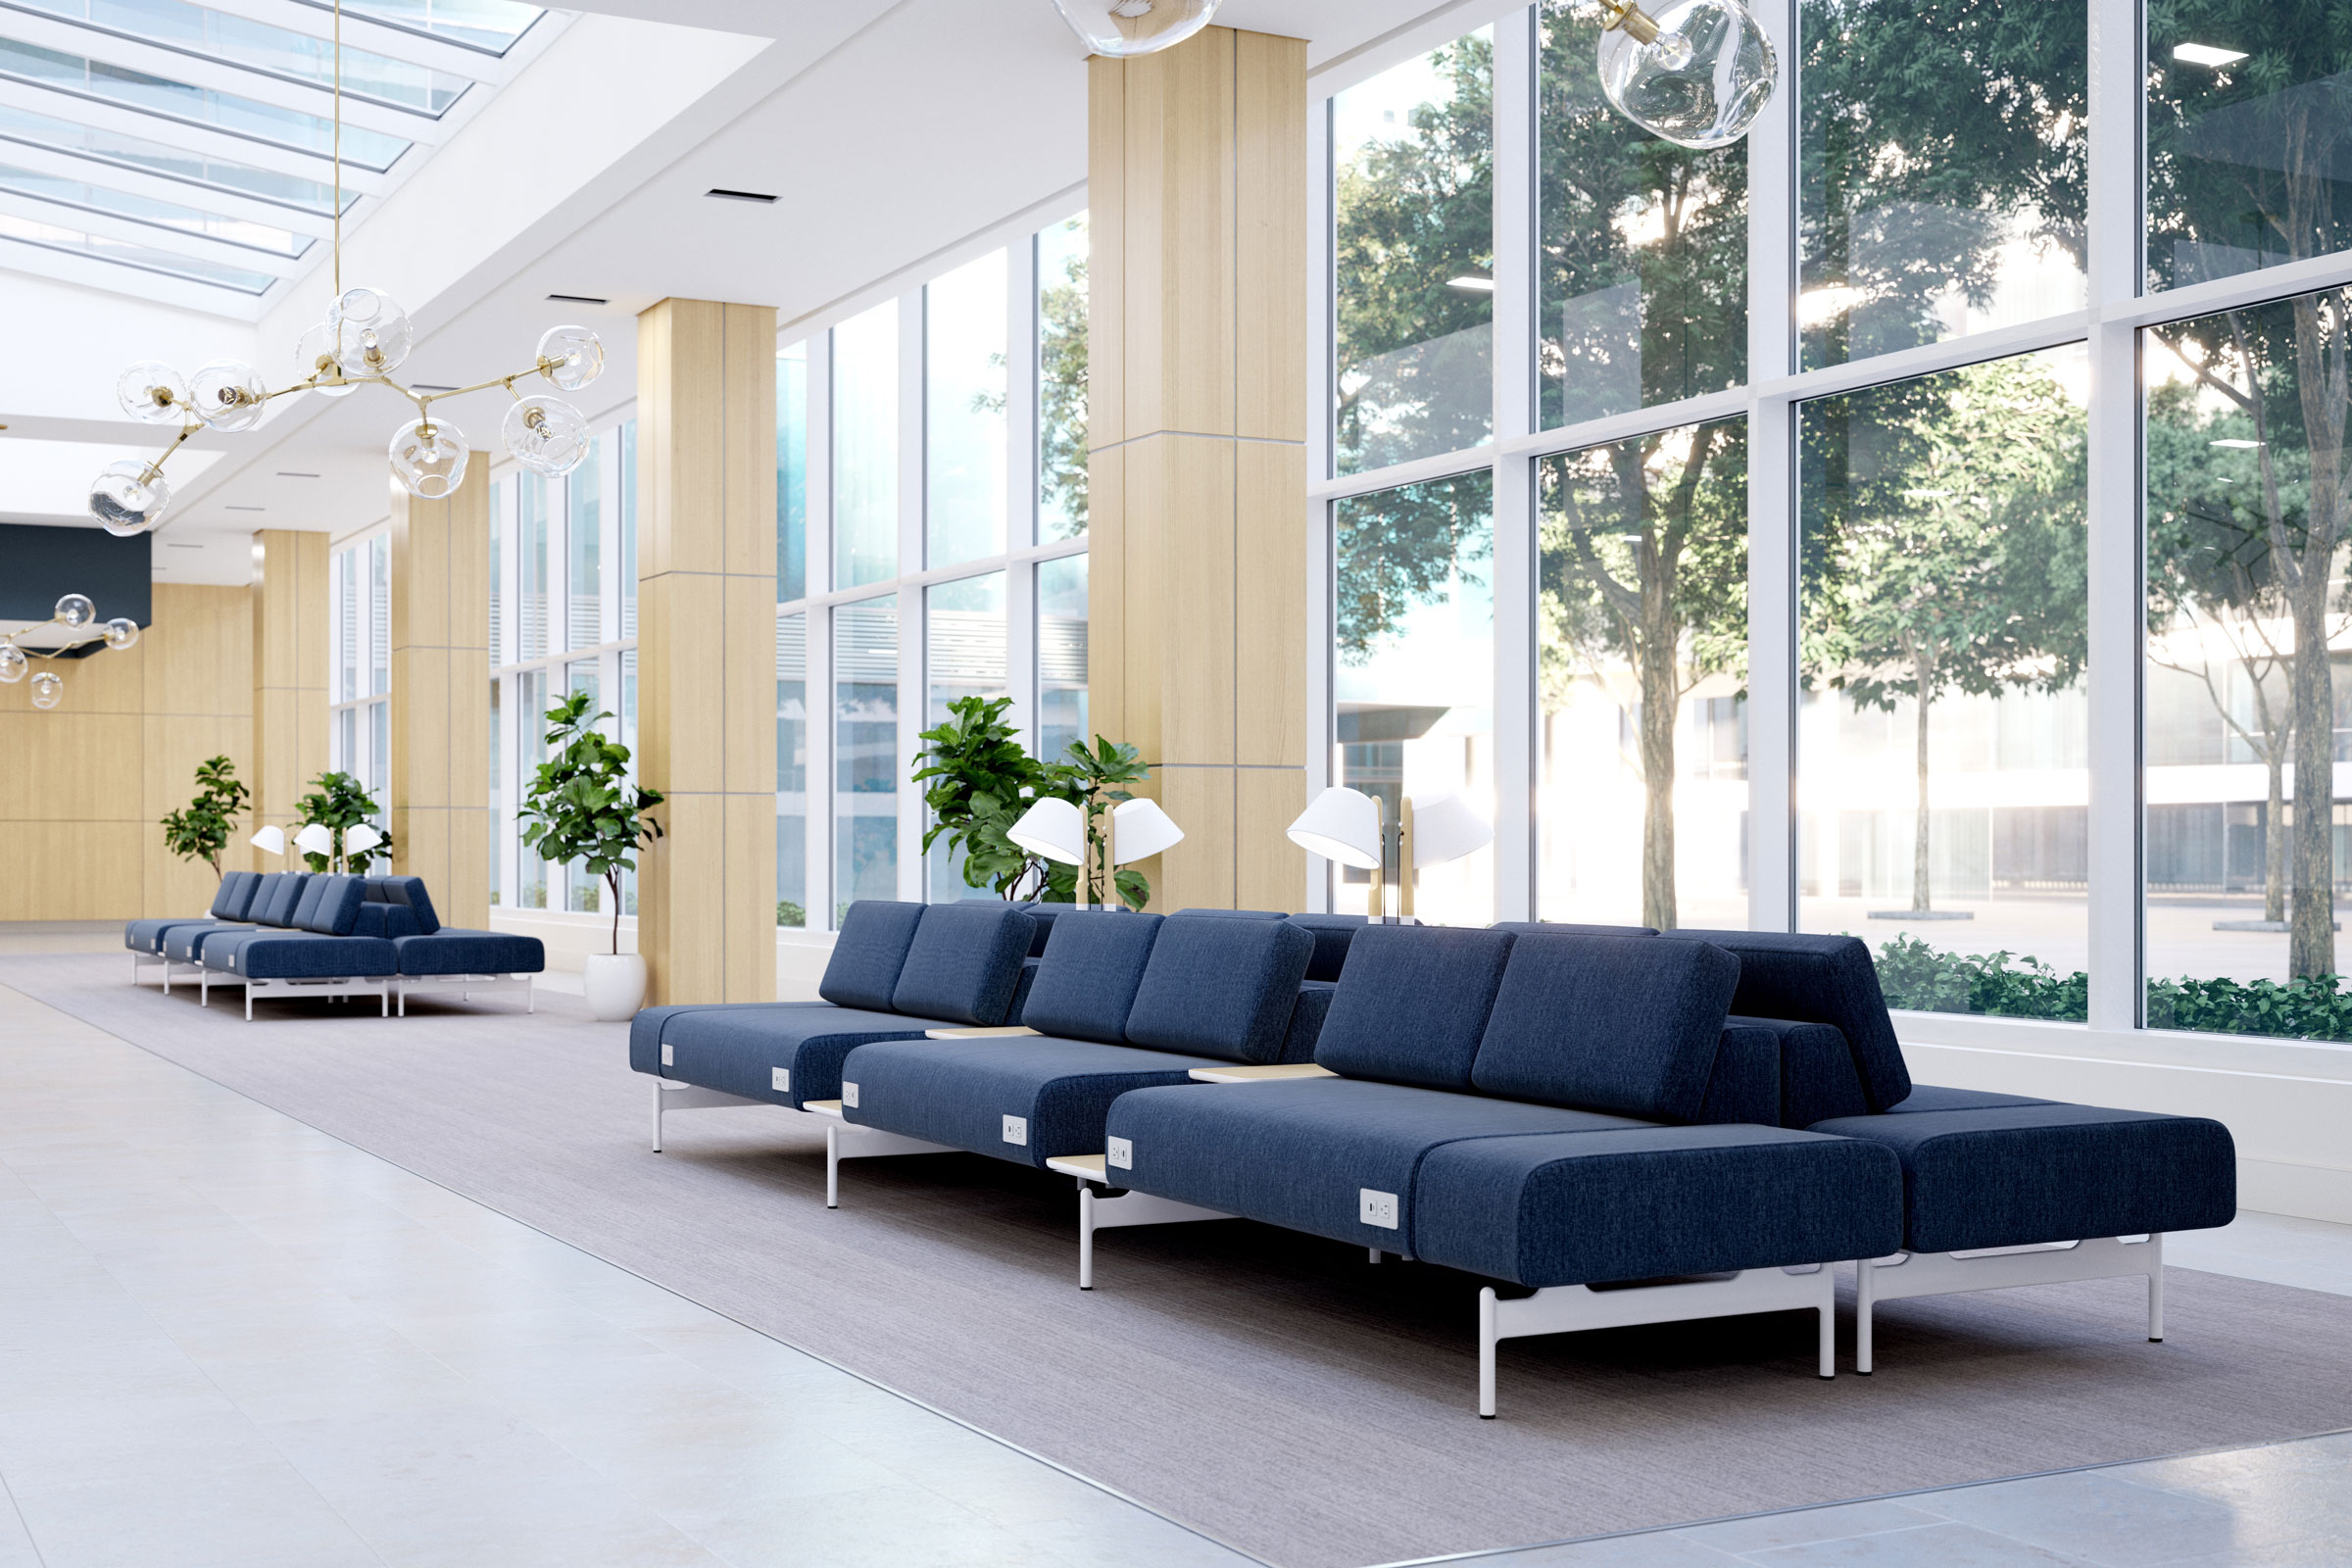 Redesigning the Waiting Room with Flexible Furniture